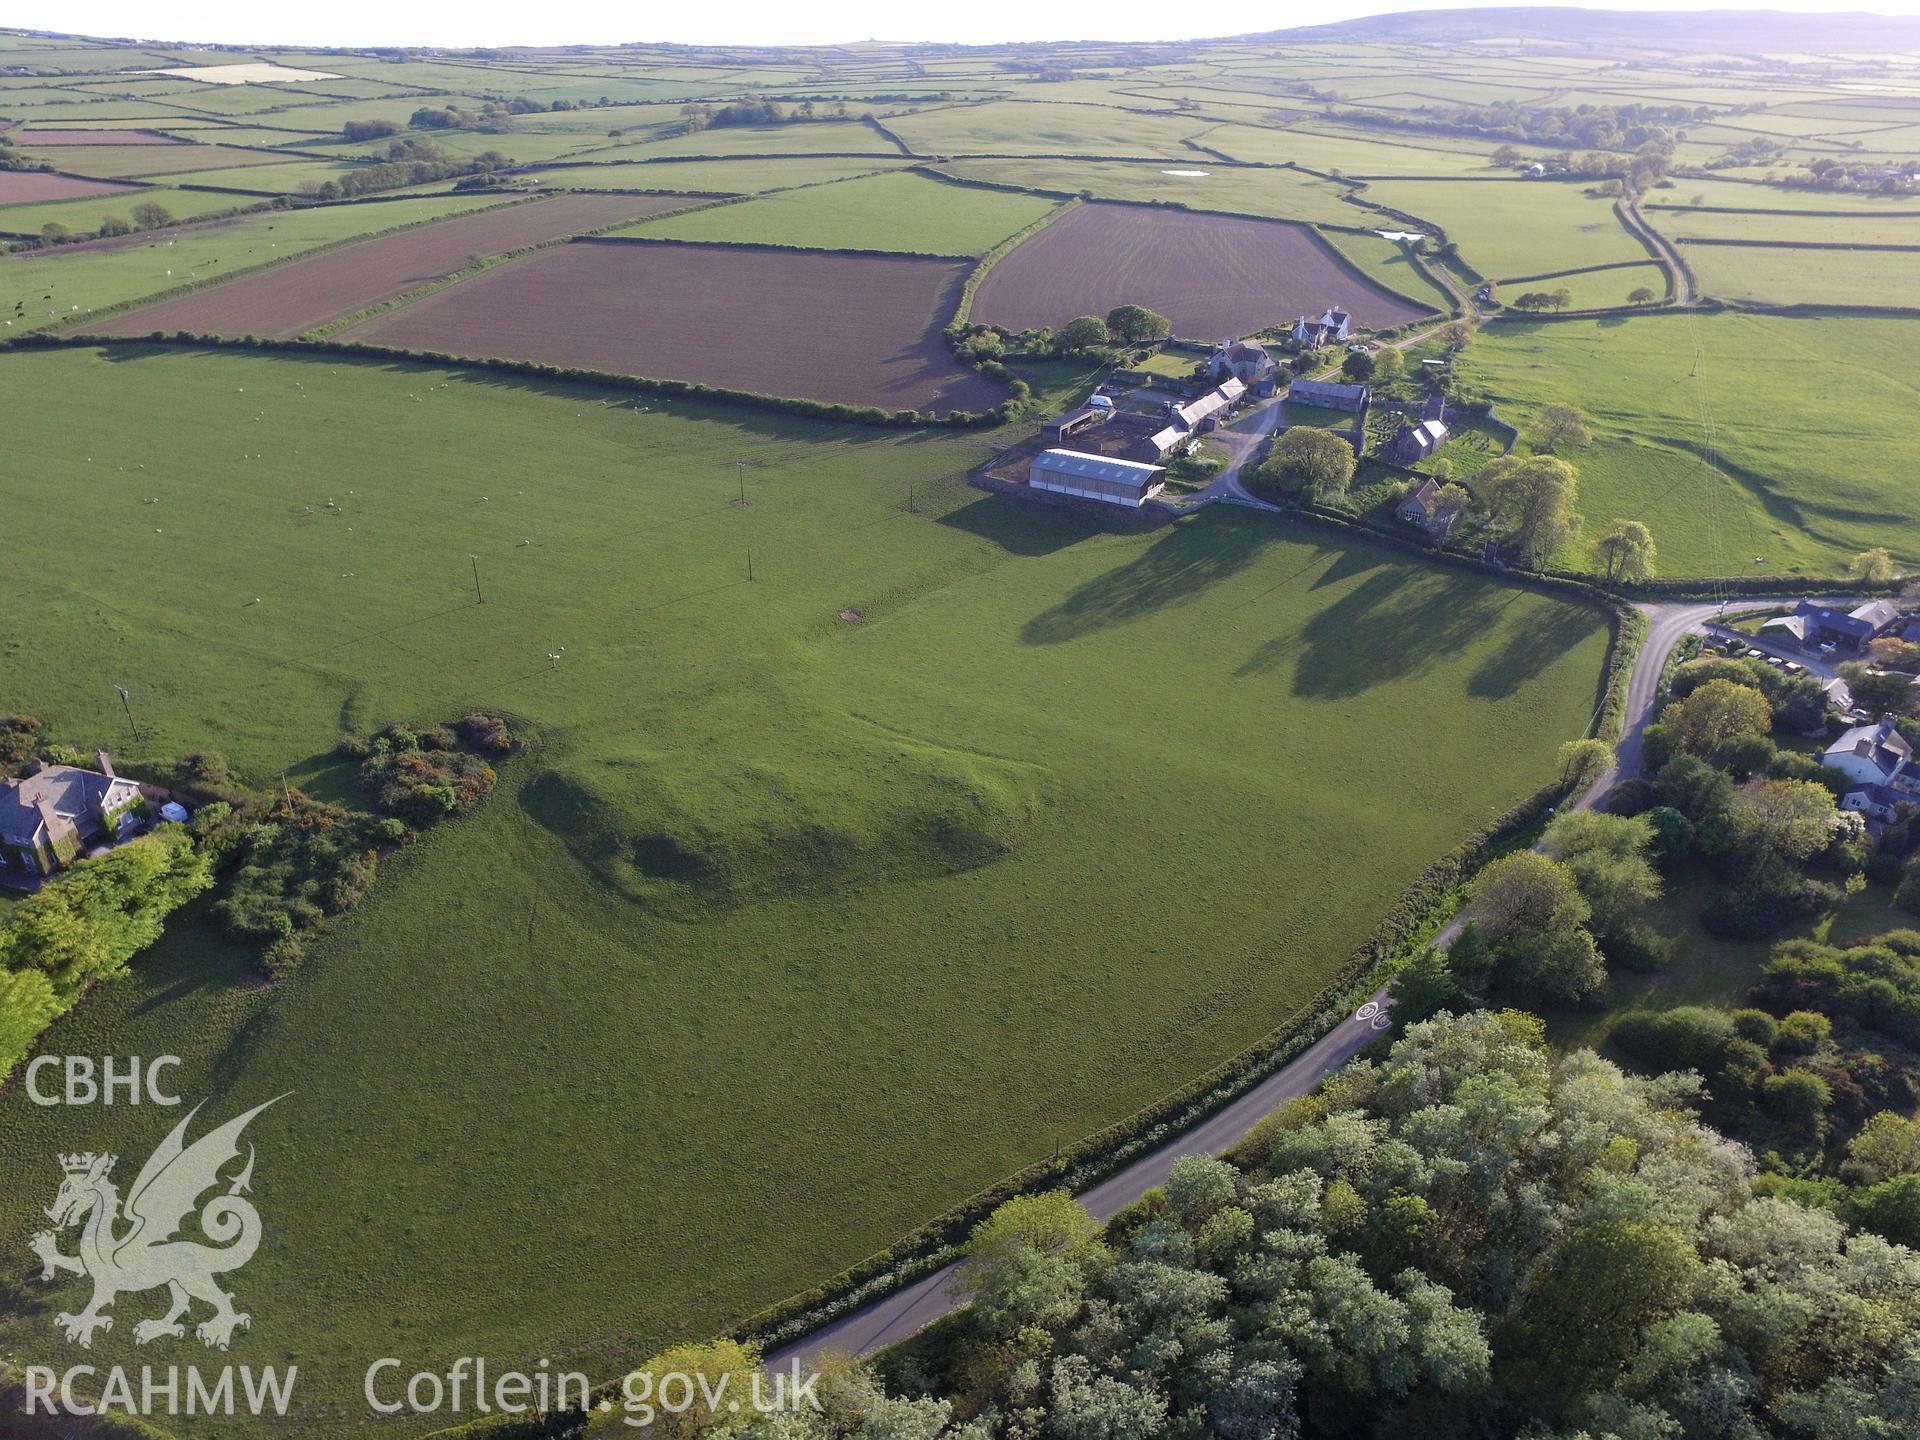 Colour photo showing aerial view of the earthworks north of Llanddewi, taken by Paul R. Davis, 19th May 2018.